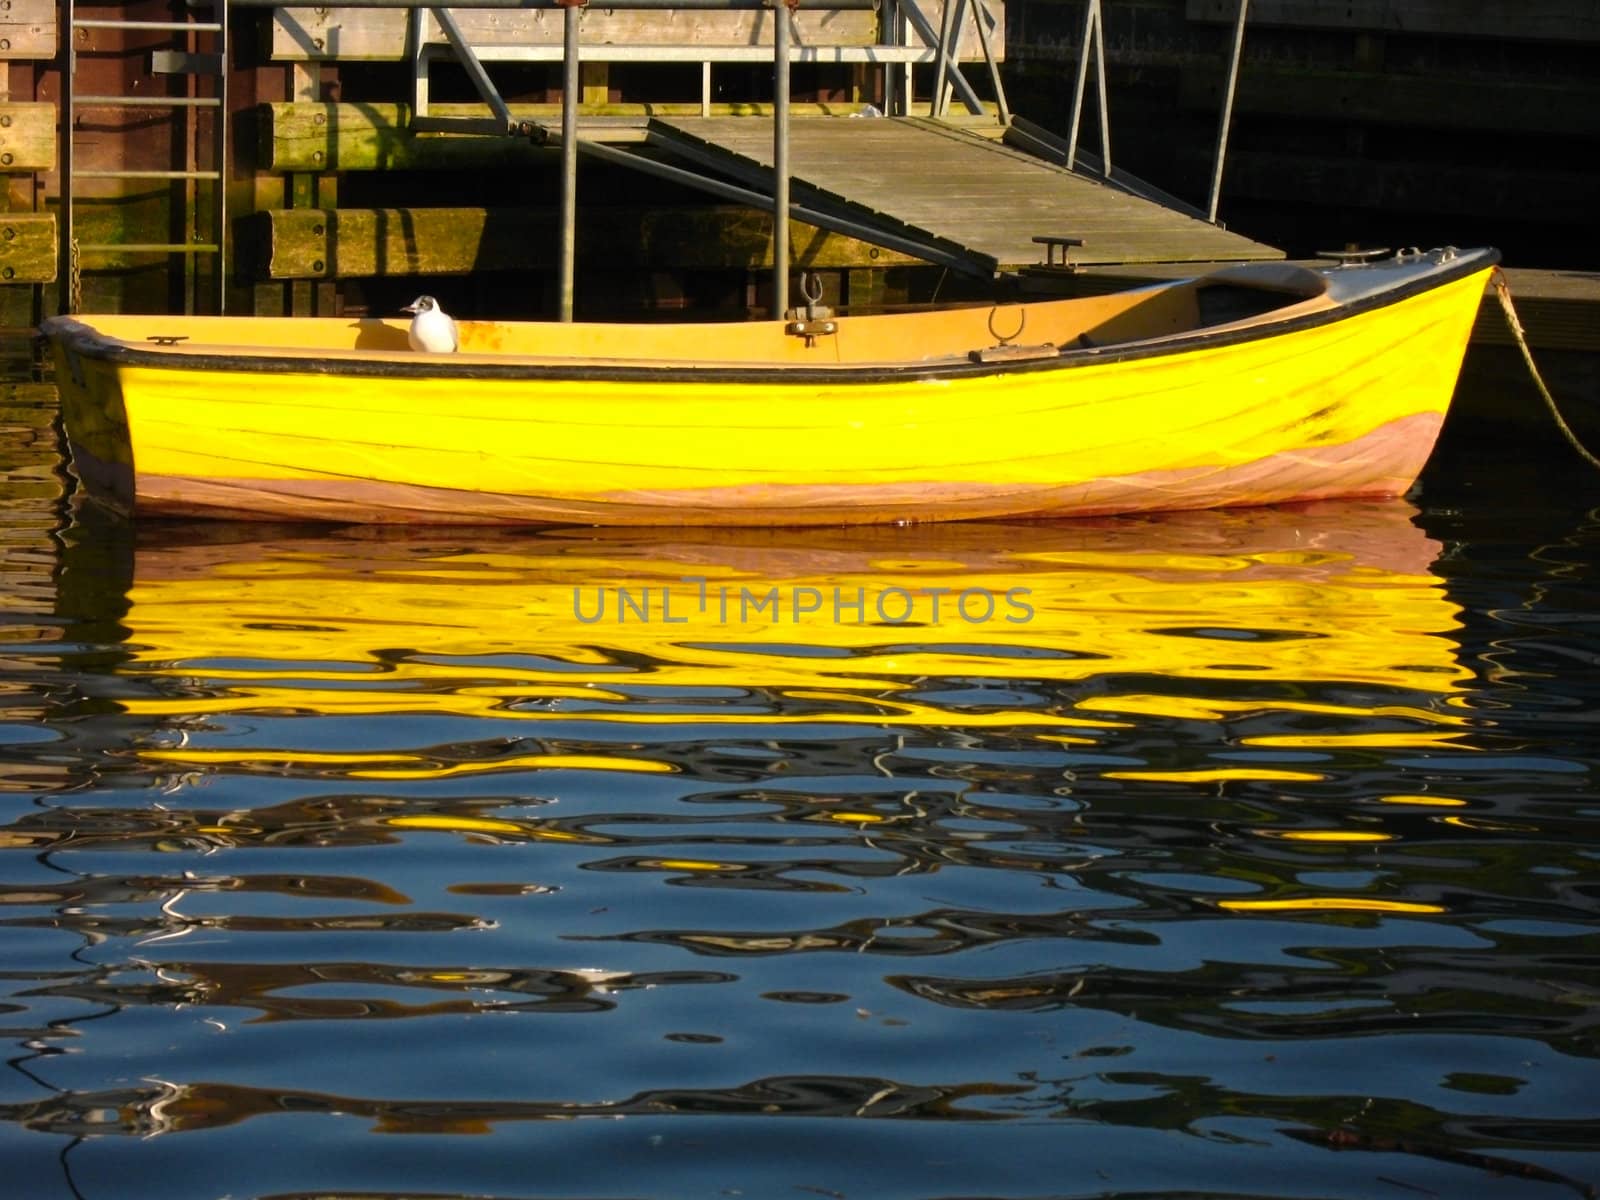 A yellow boat by a jetty